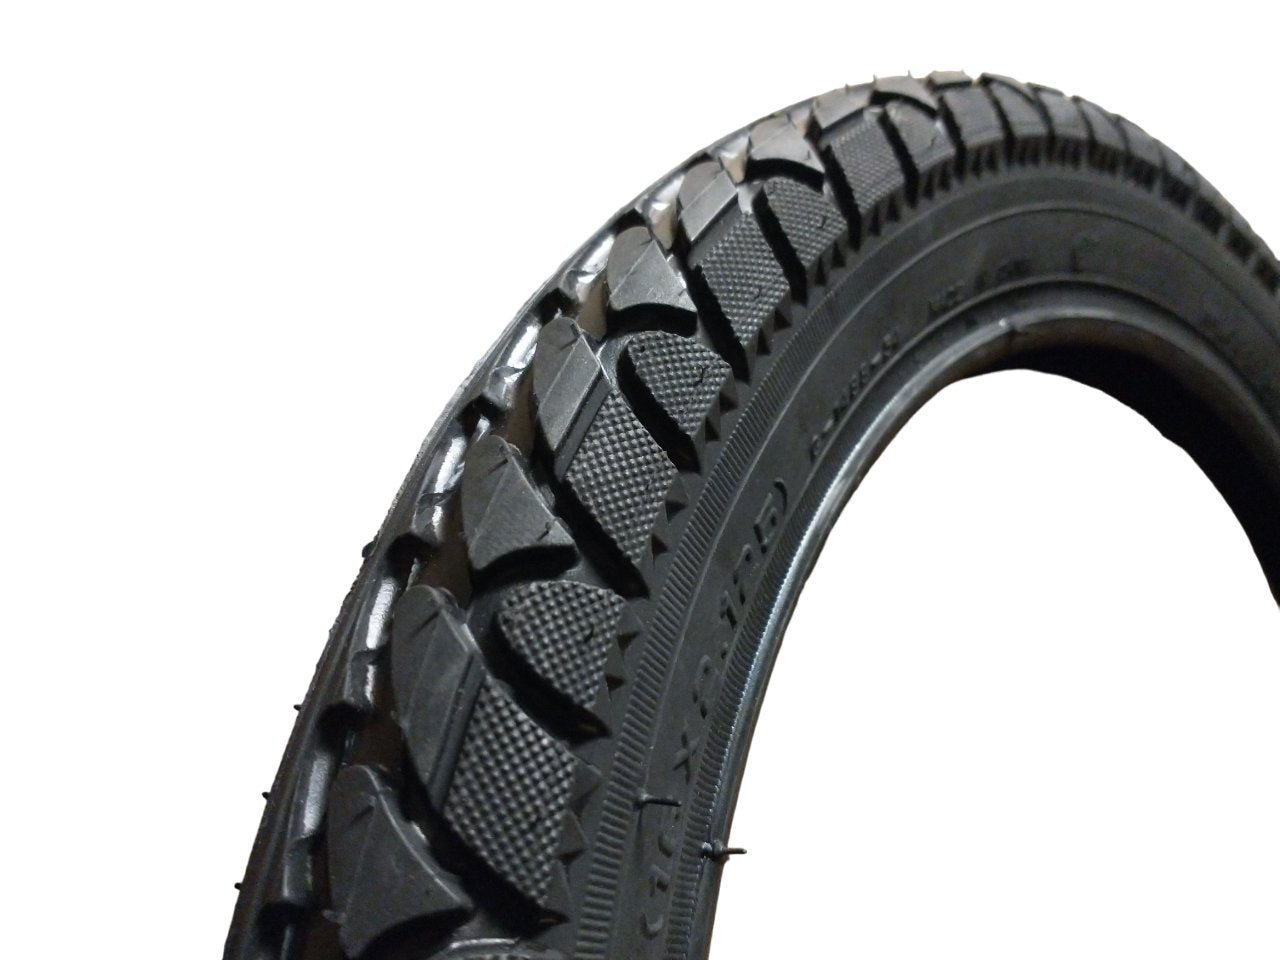 EUC Tires Tubes and Accessories